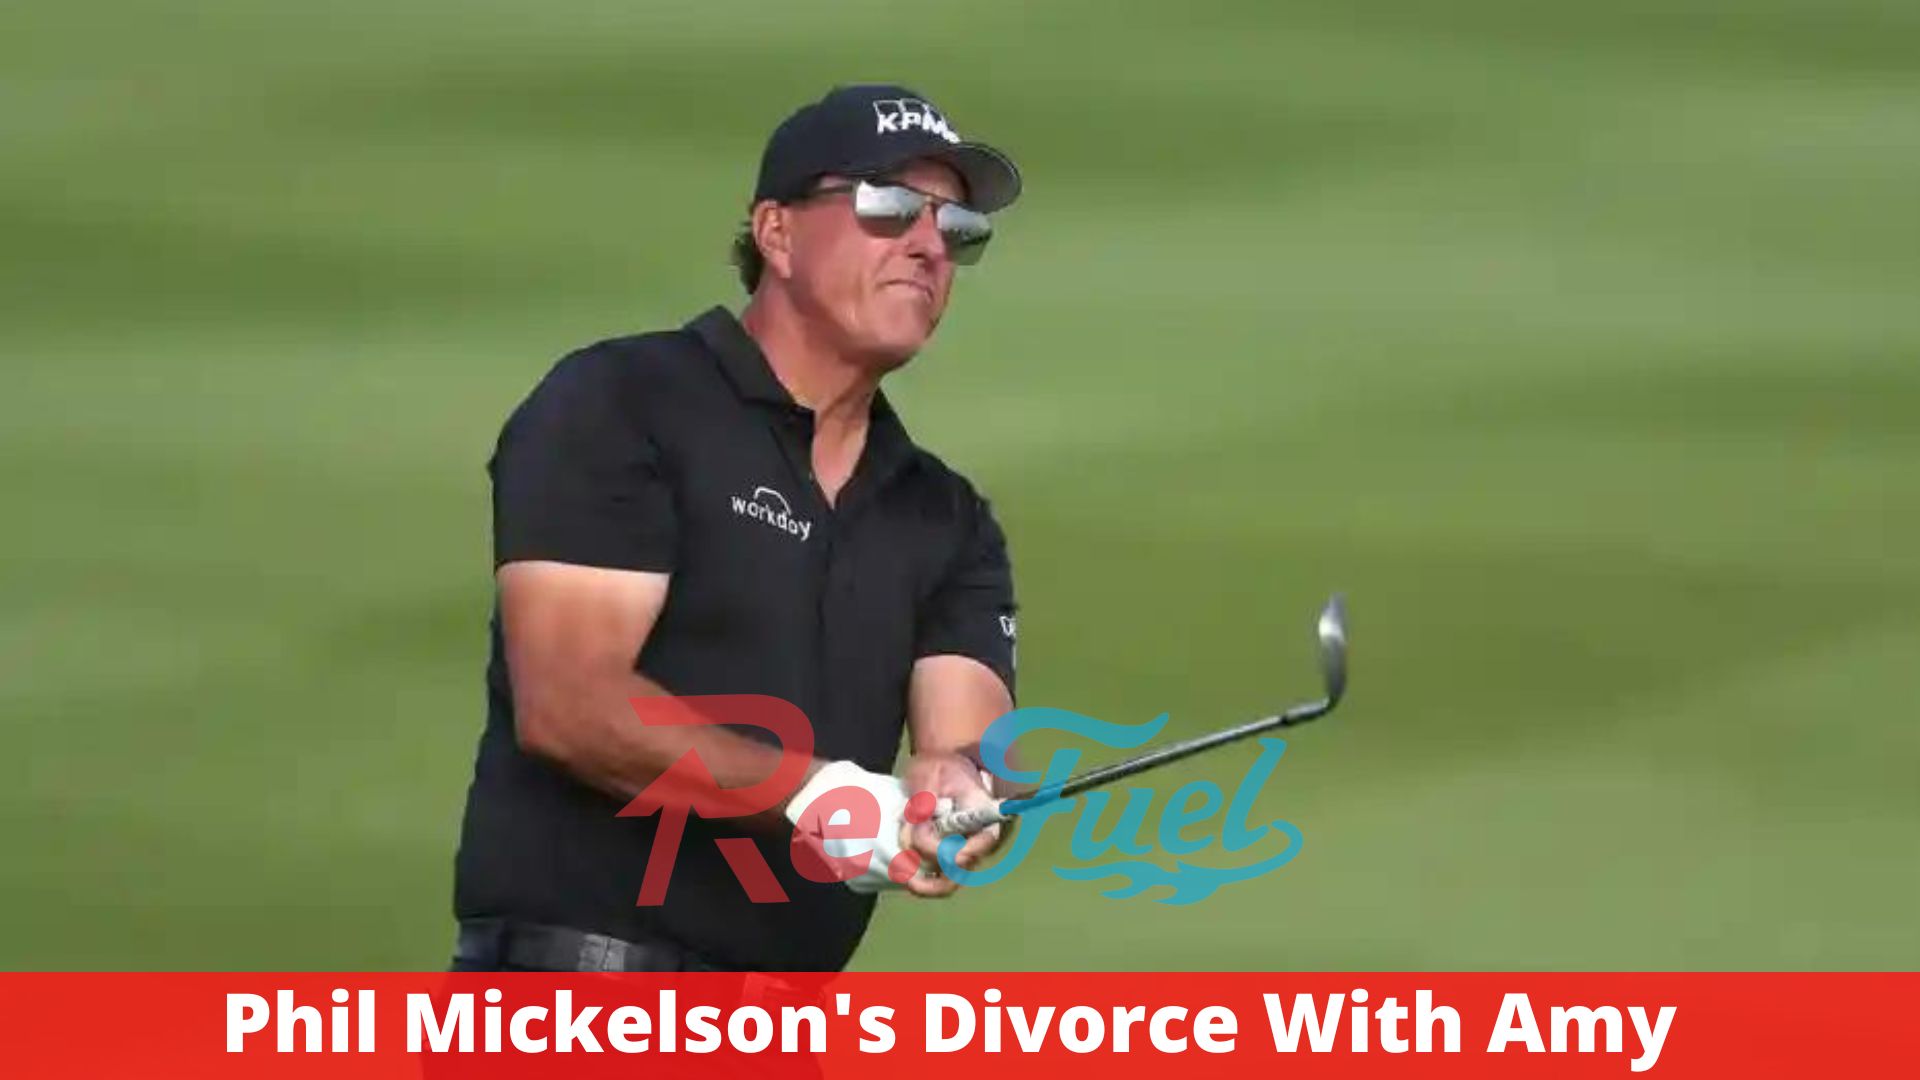 Phil Mickelson's Divorce With Amy